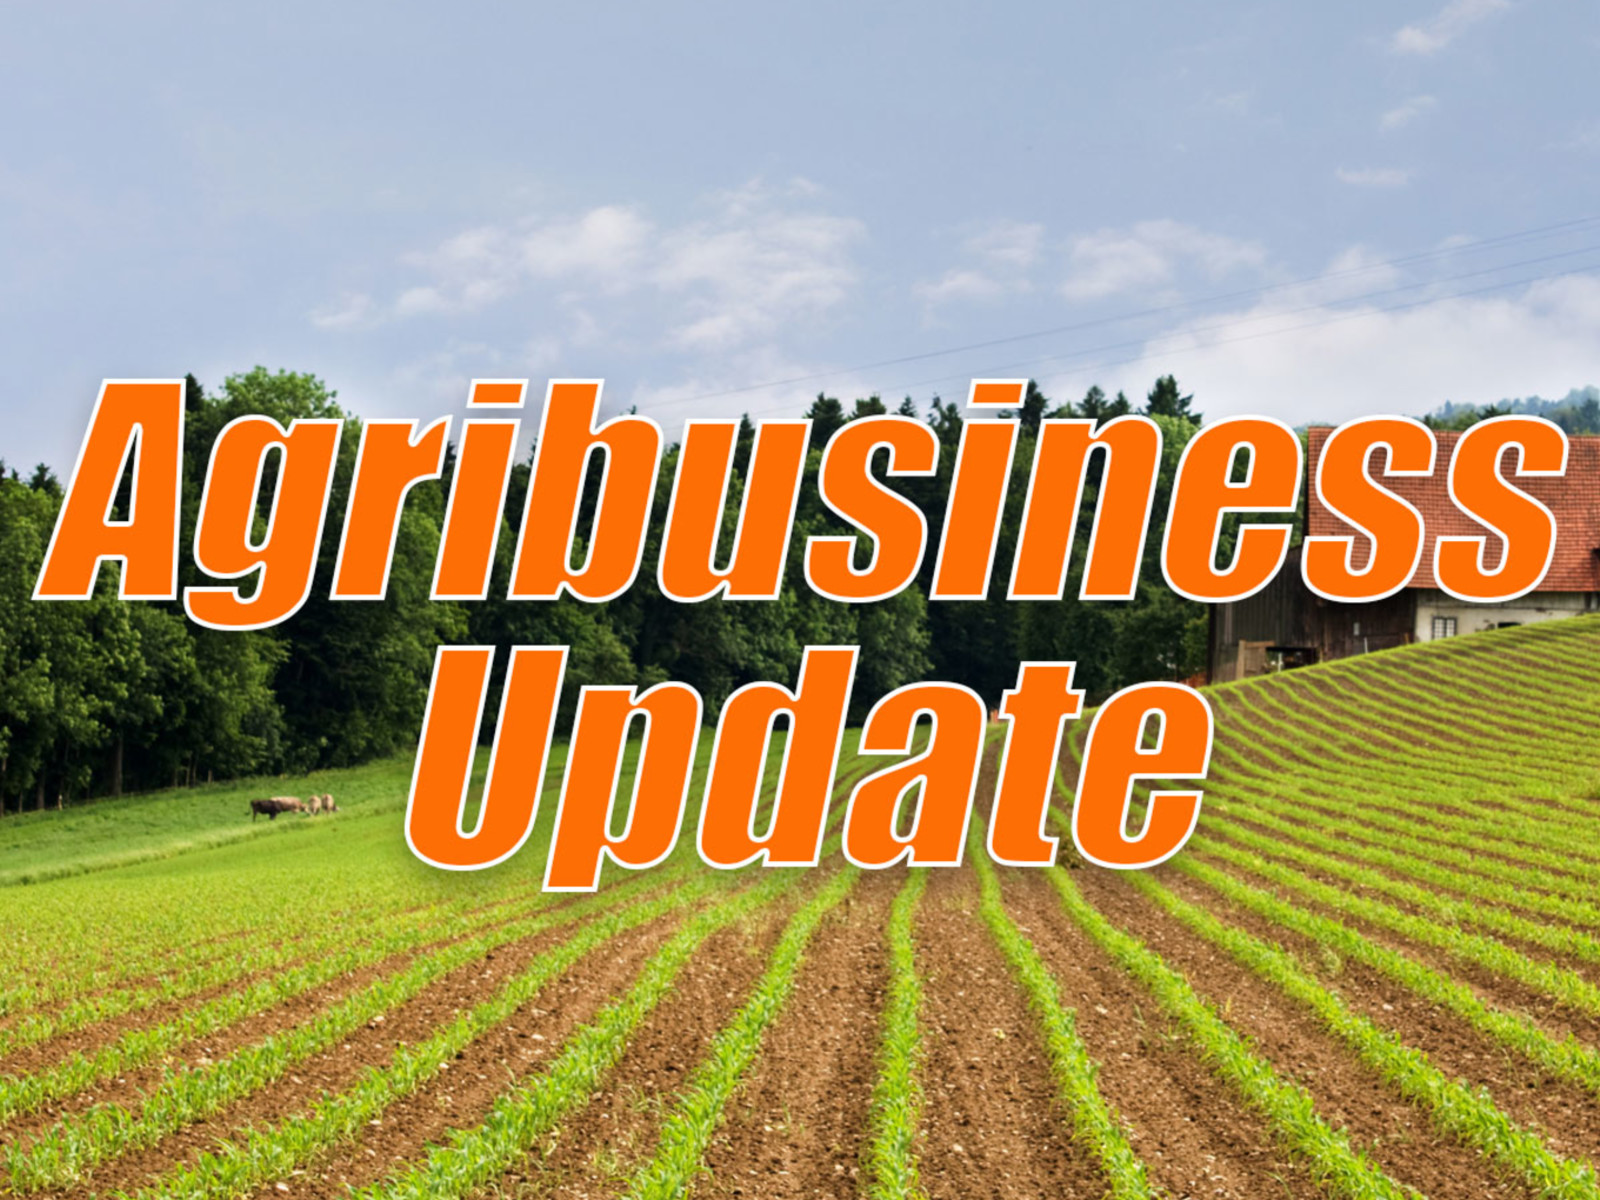 Reverse Discontinued NASS Reports and Farmer Sentiment Down